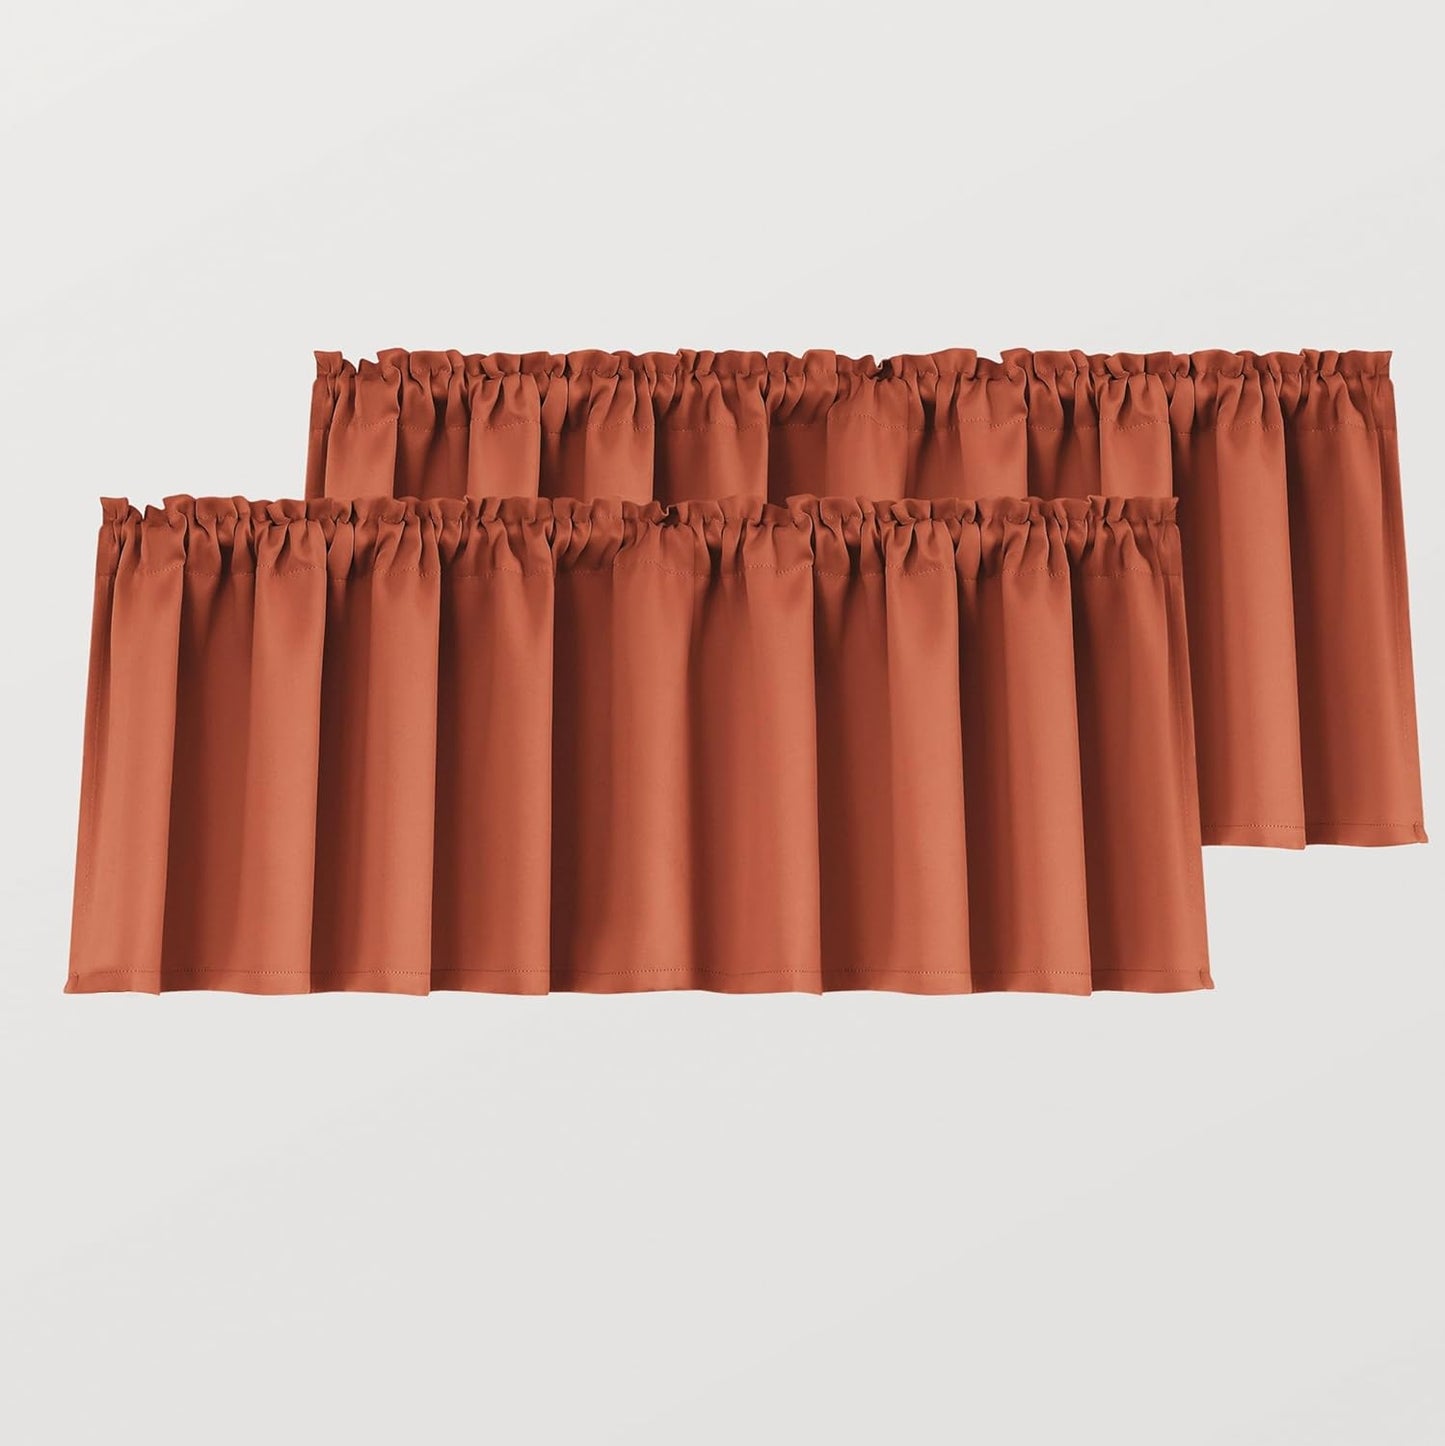 Mrs.Naturall Beige Valance Curtains for Windows 36X16 Inch Length  MRS.NATURALL TEXTILE Dark Orange 36X16 